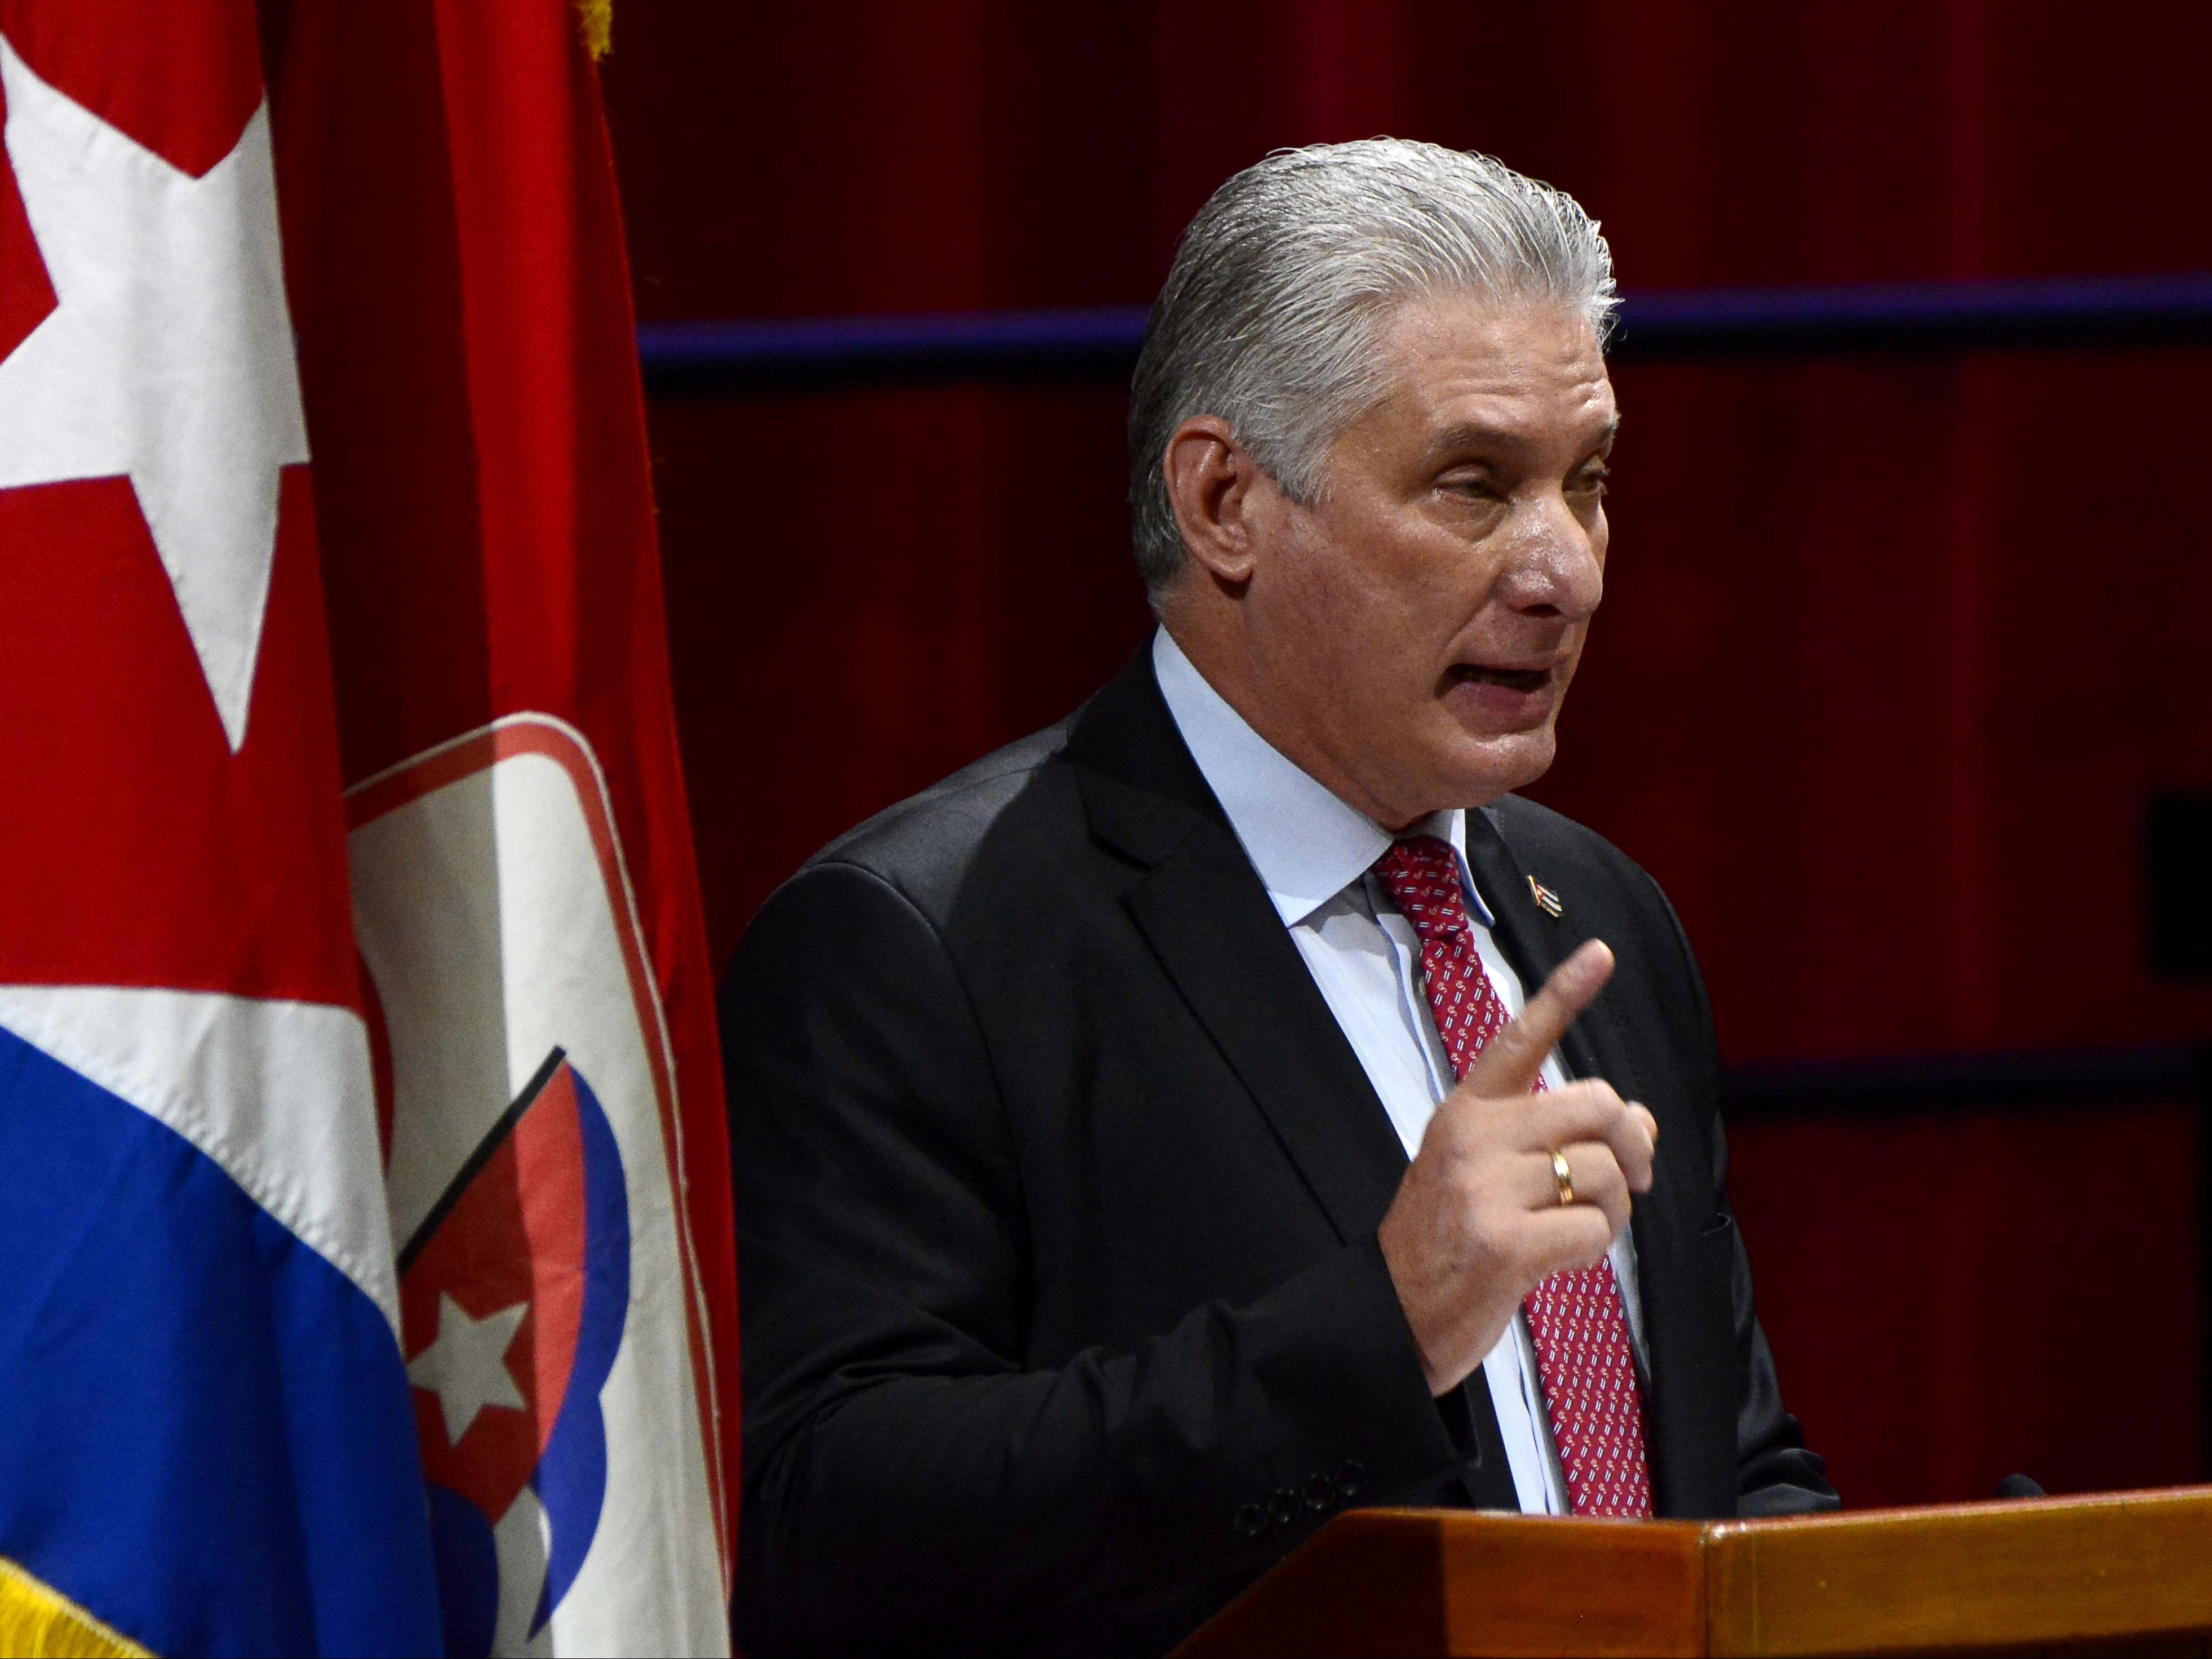 Miguel Diaz-Canel was elected to the most powerful position in Cuba at the Communist Party’s conference on Monday